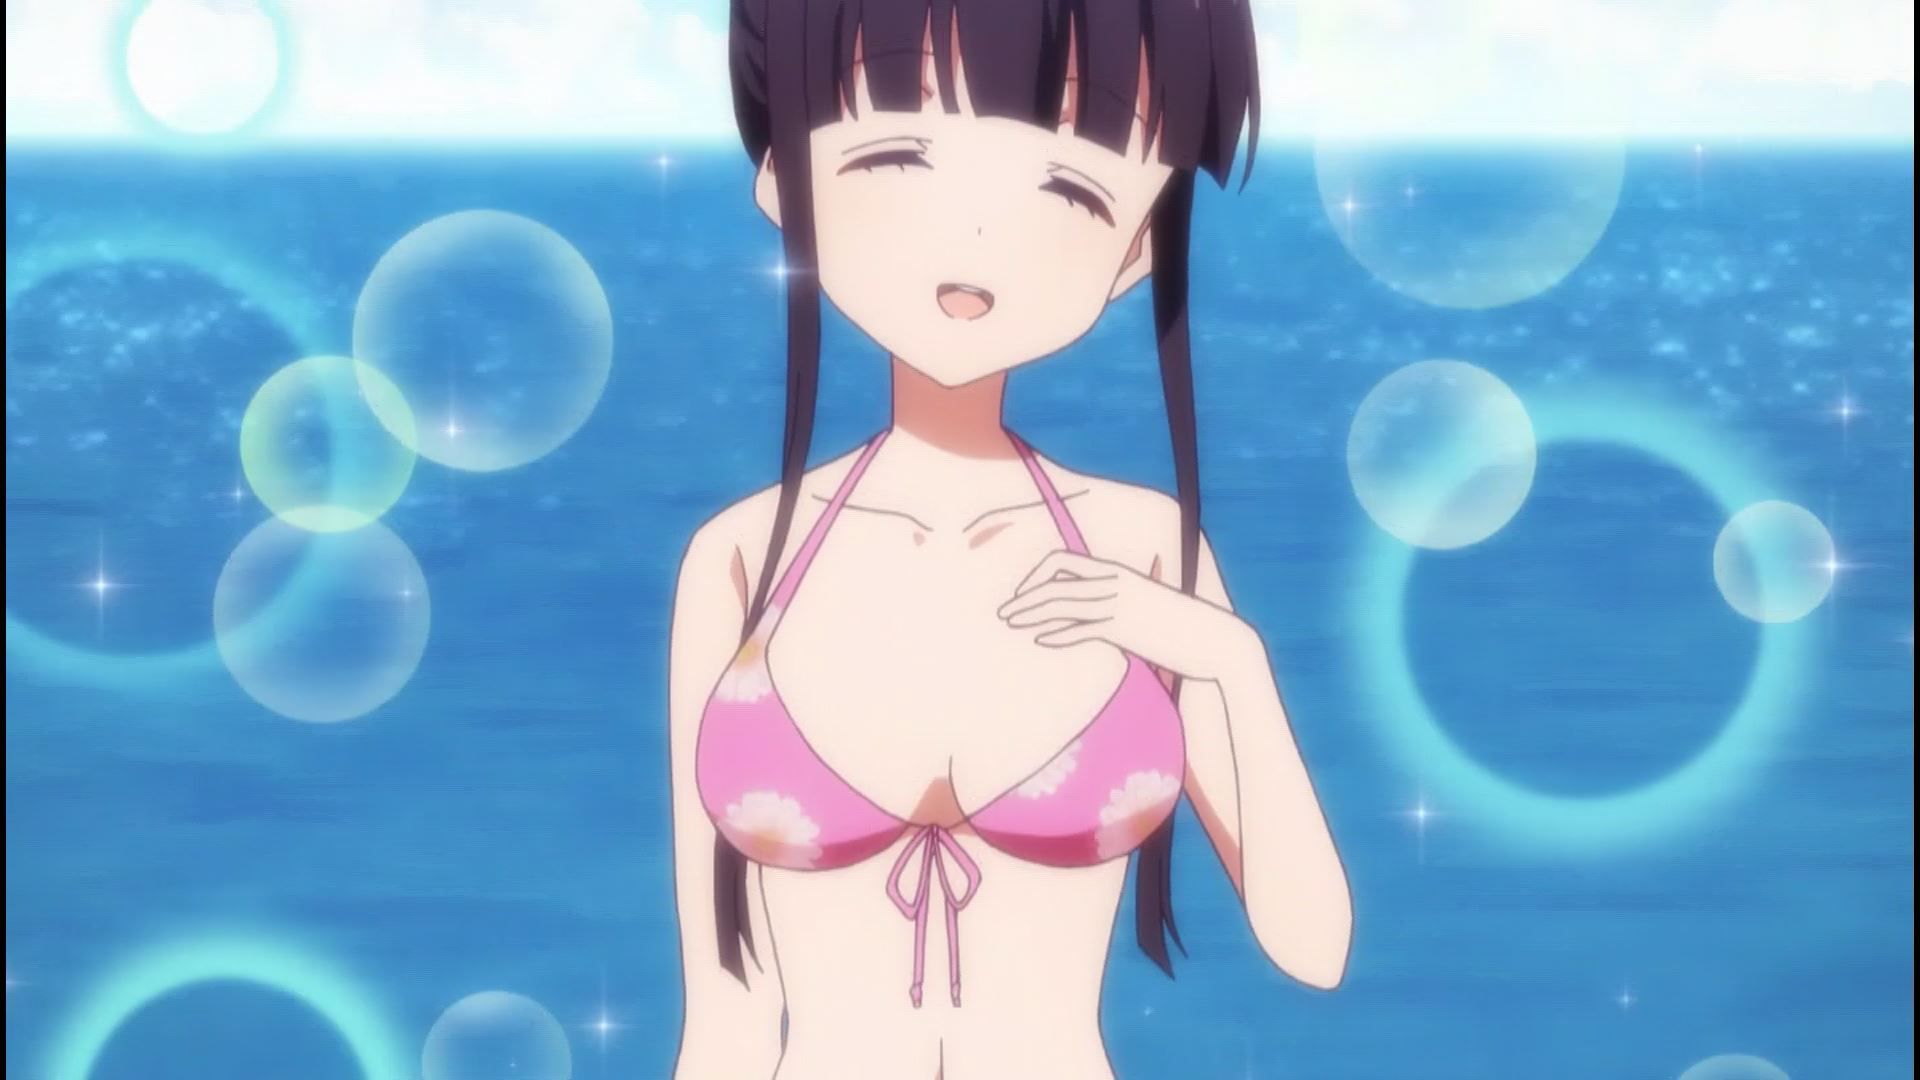 Anime ' blend S ' 6 episodes of girls erotic swimsuit times! such as breasts and buttocks! 12